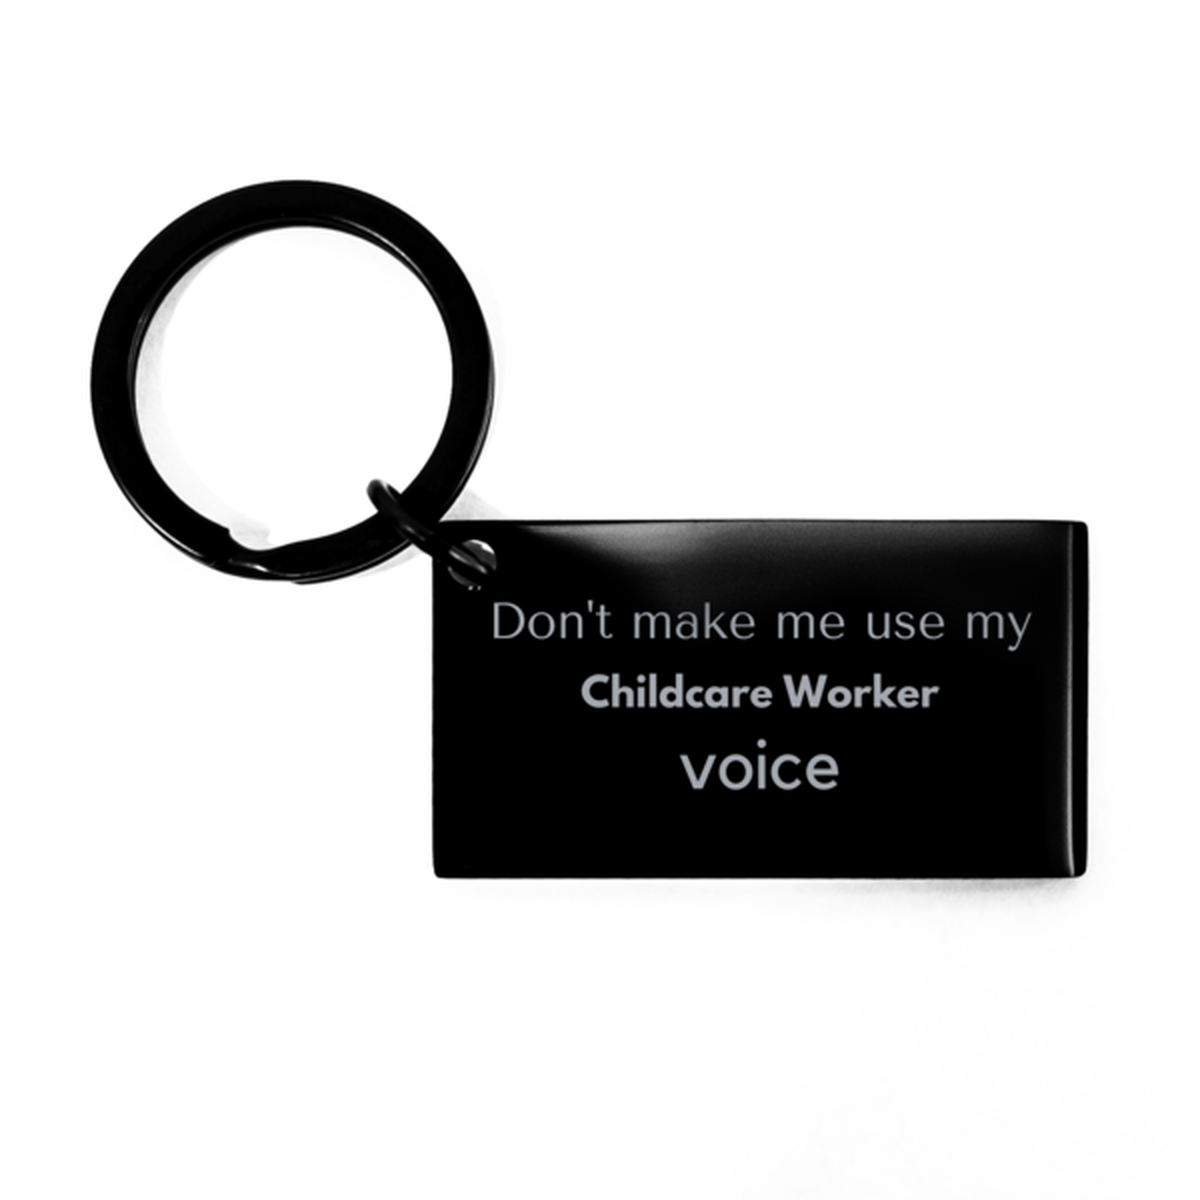 Don't make me use my Childcare Worker voice, Sarcasm Childcare Worker Gifts, Christmas Childcare Worker Keychain Birthday Unique Gifts For Childcare Worker Coworkers, Men, Women, Colleague, Friends